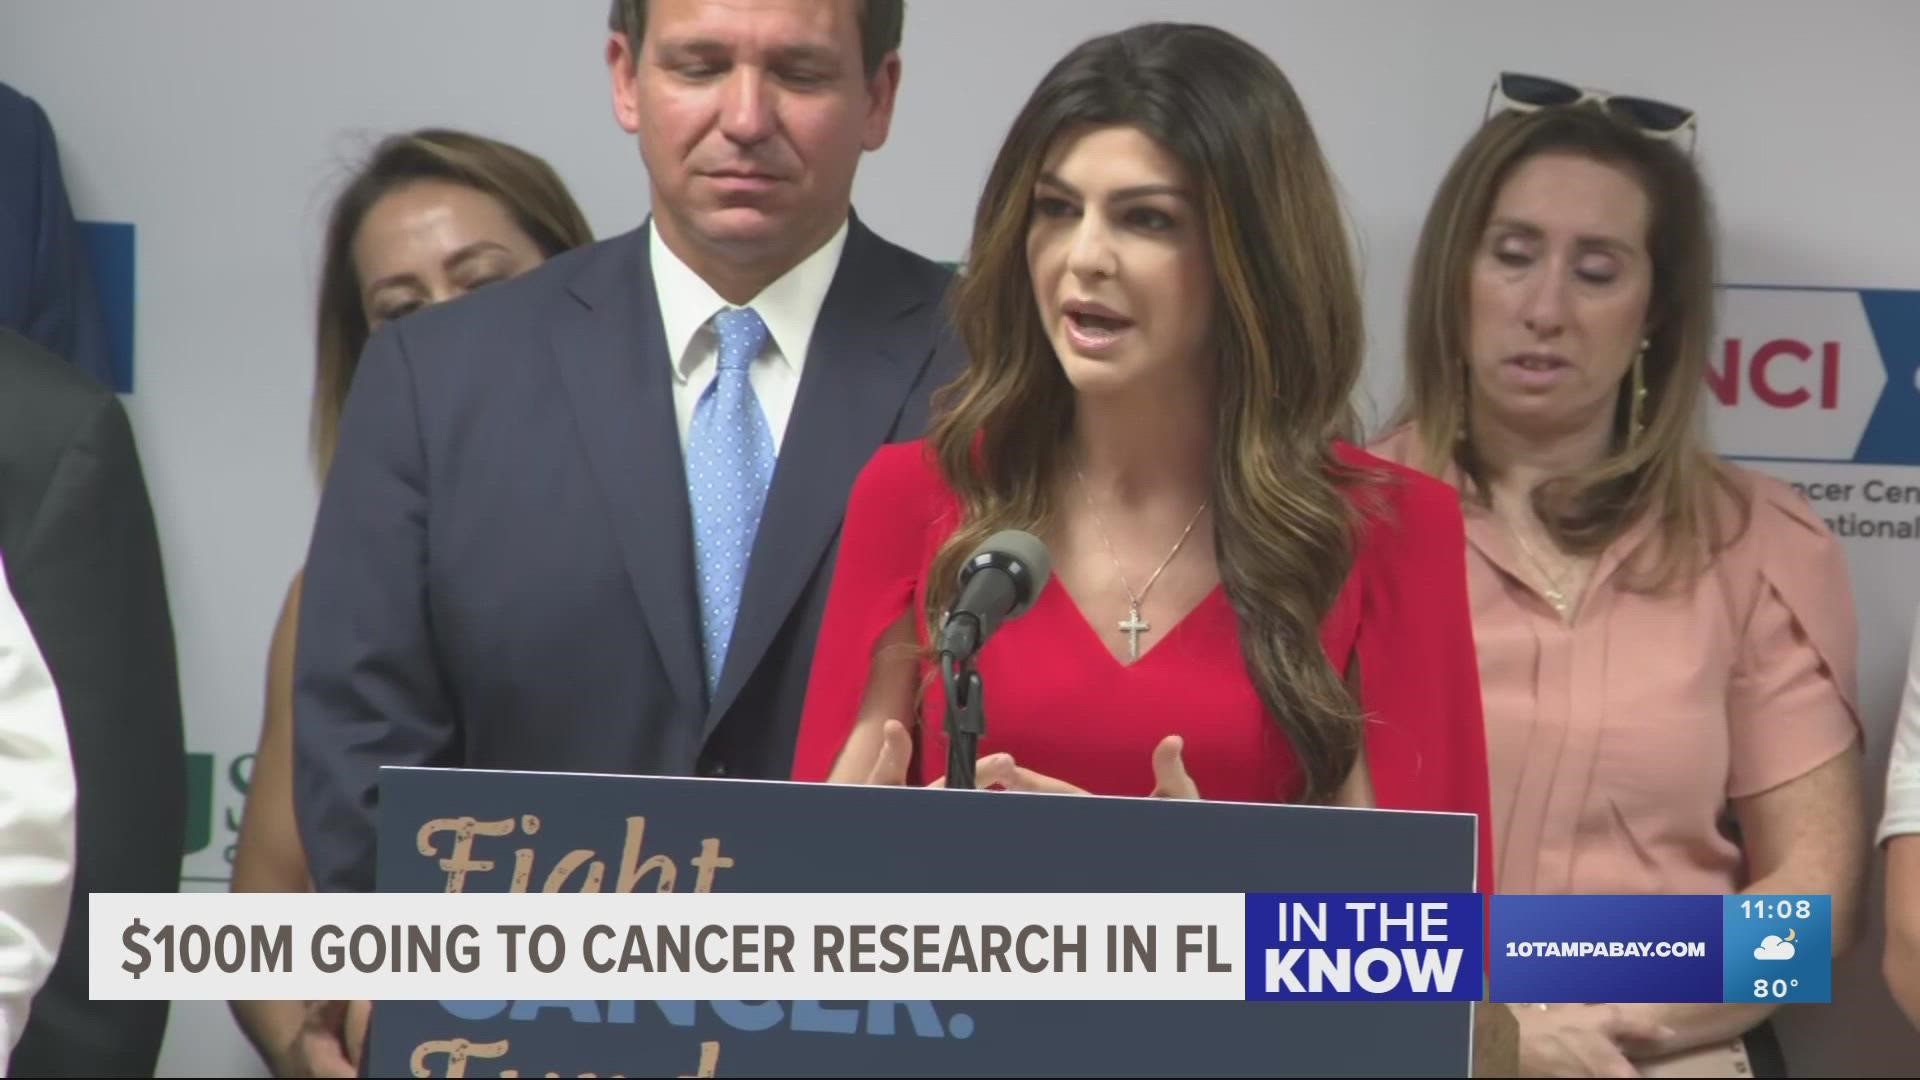 DeSantis announced his wife was "cancer-free" in March following months of treatment.